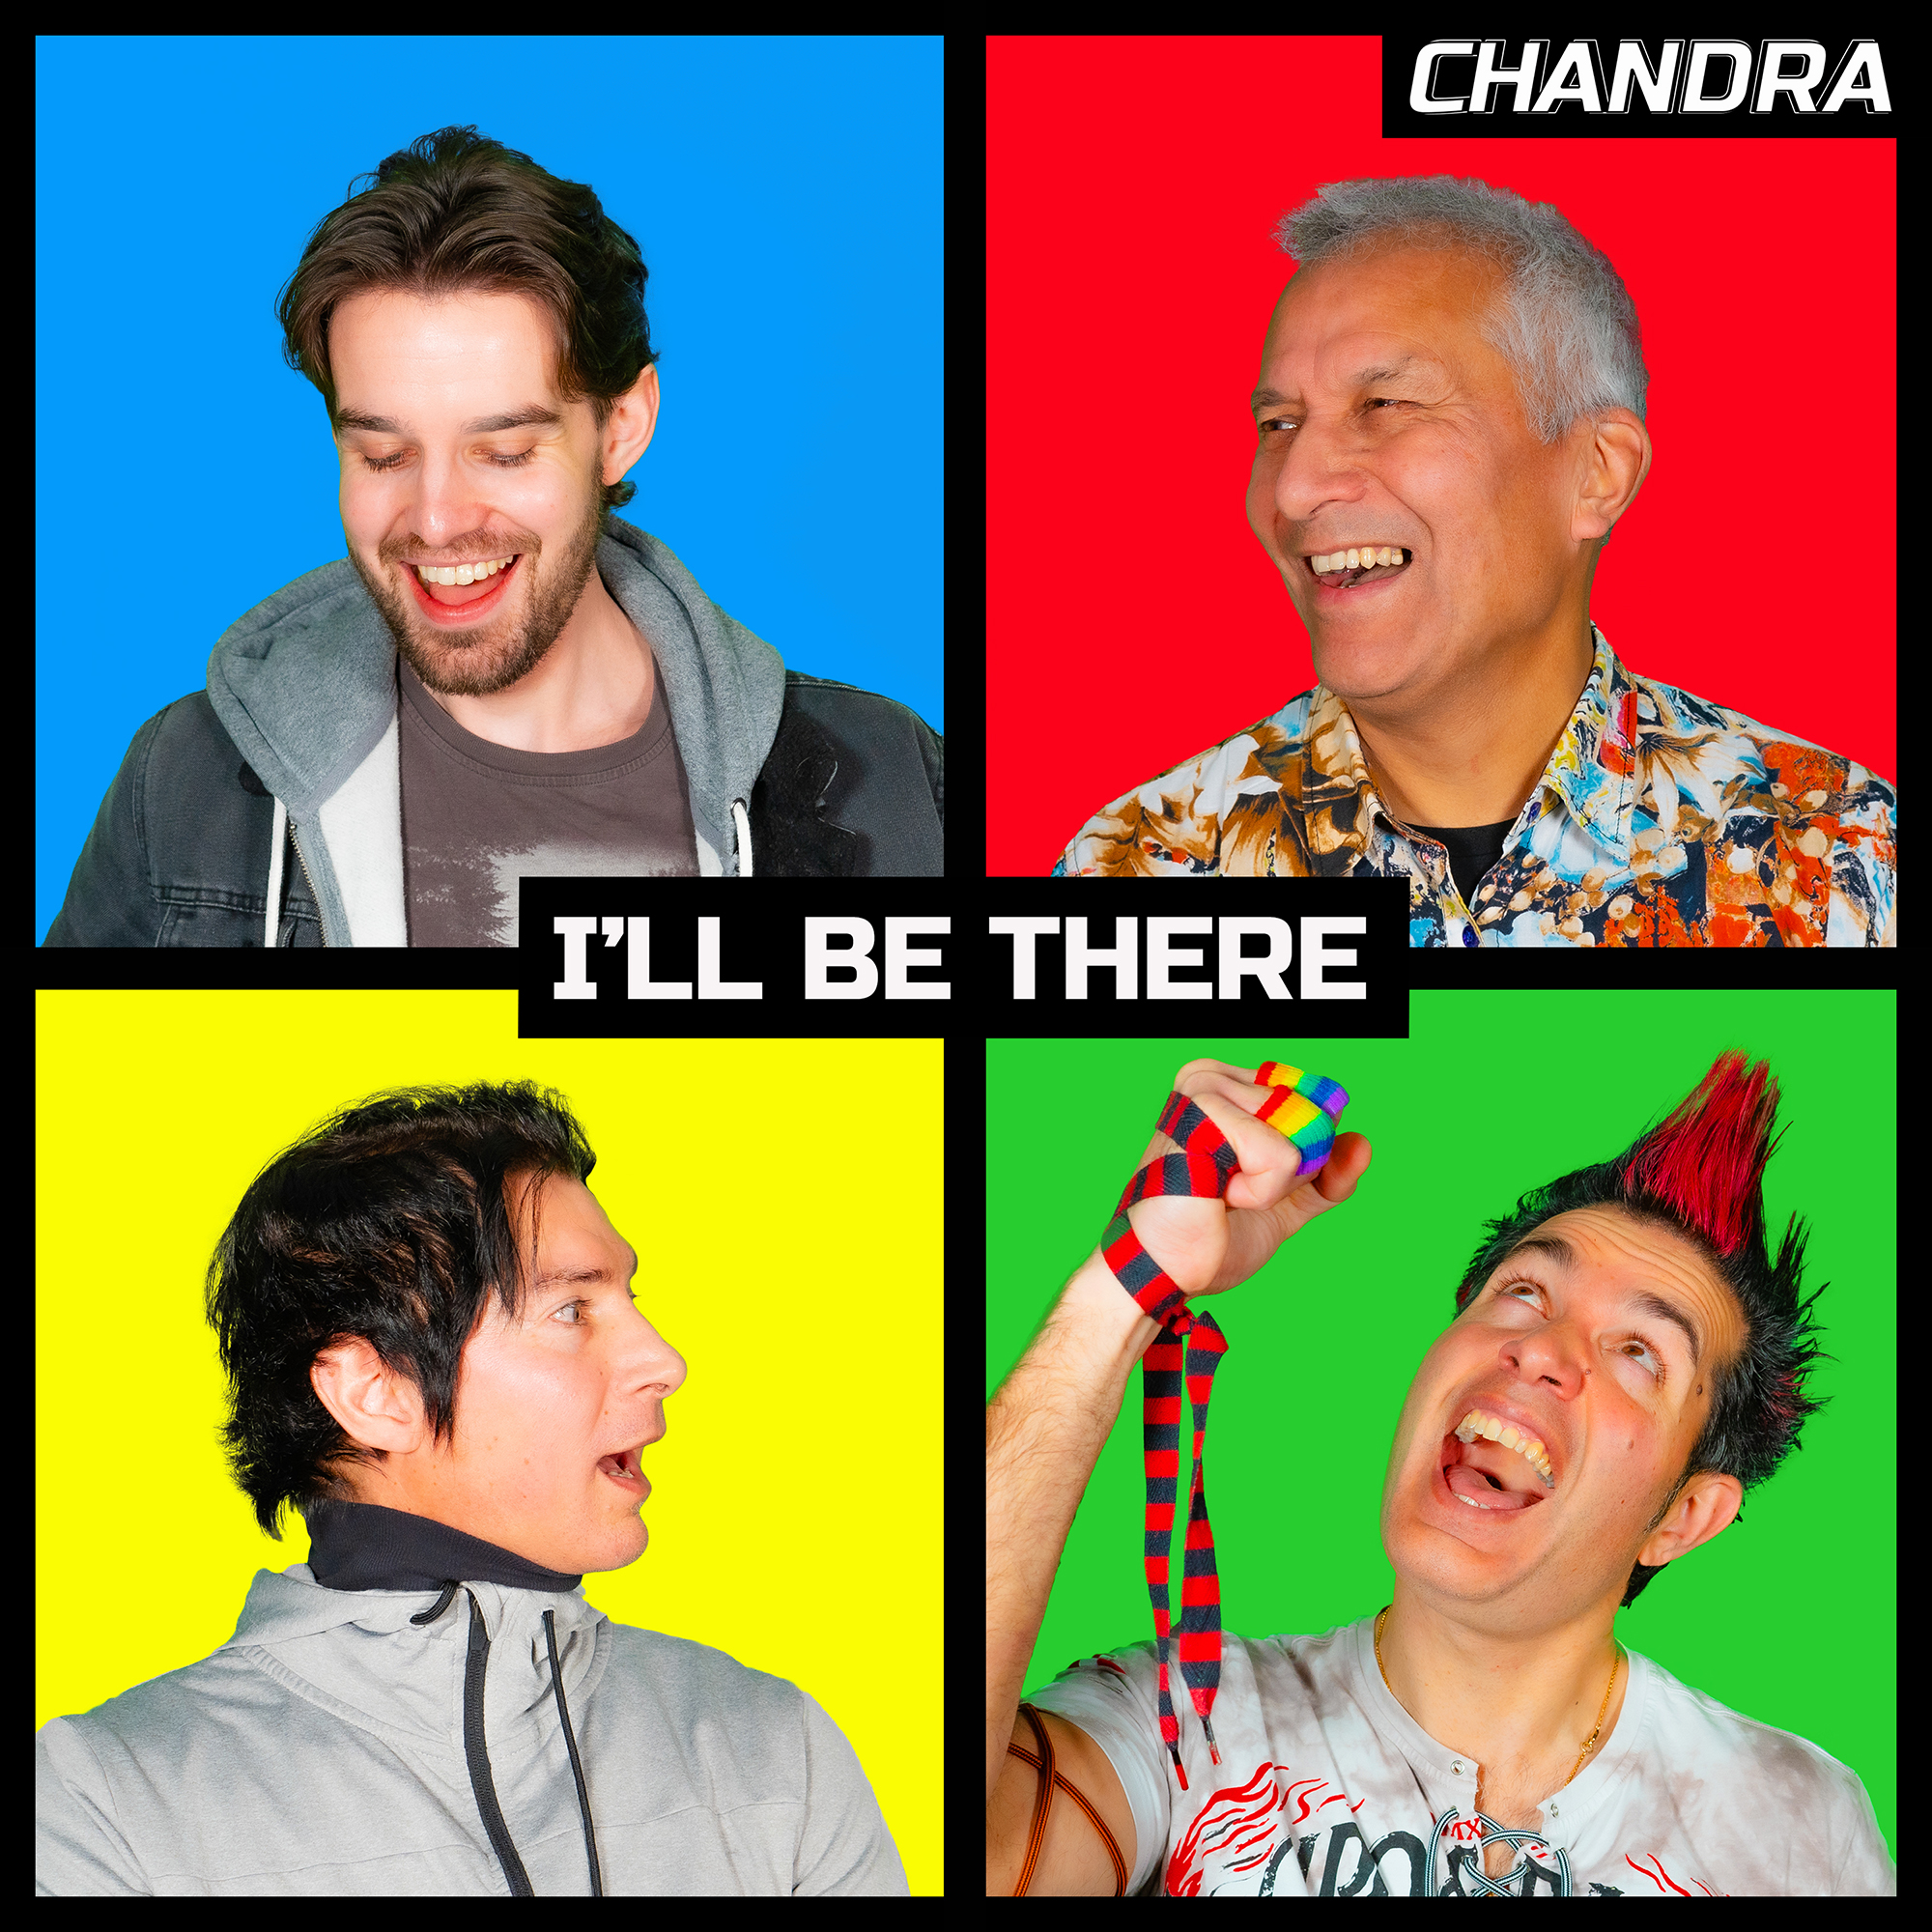 Chandra – “I’ll Be There”